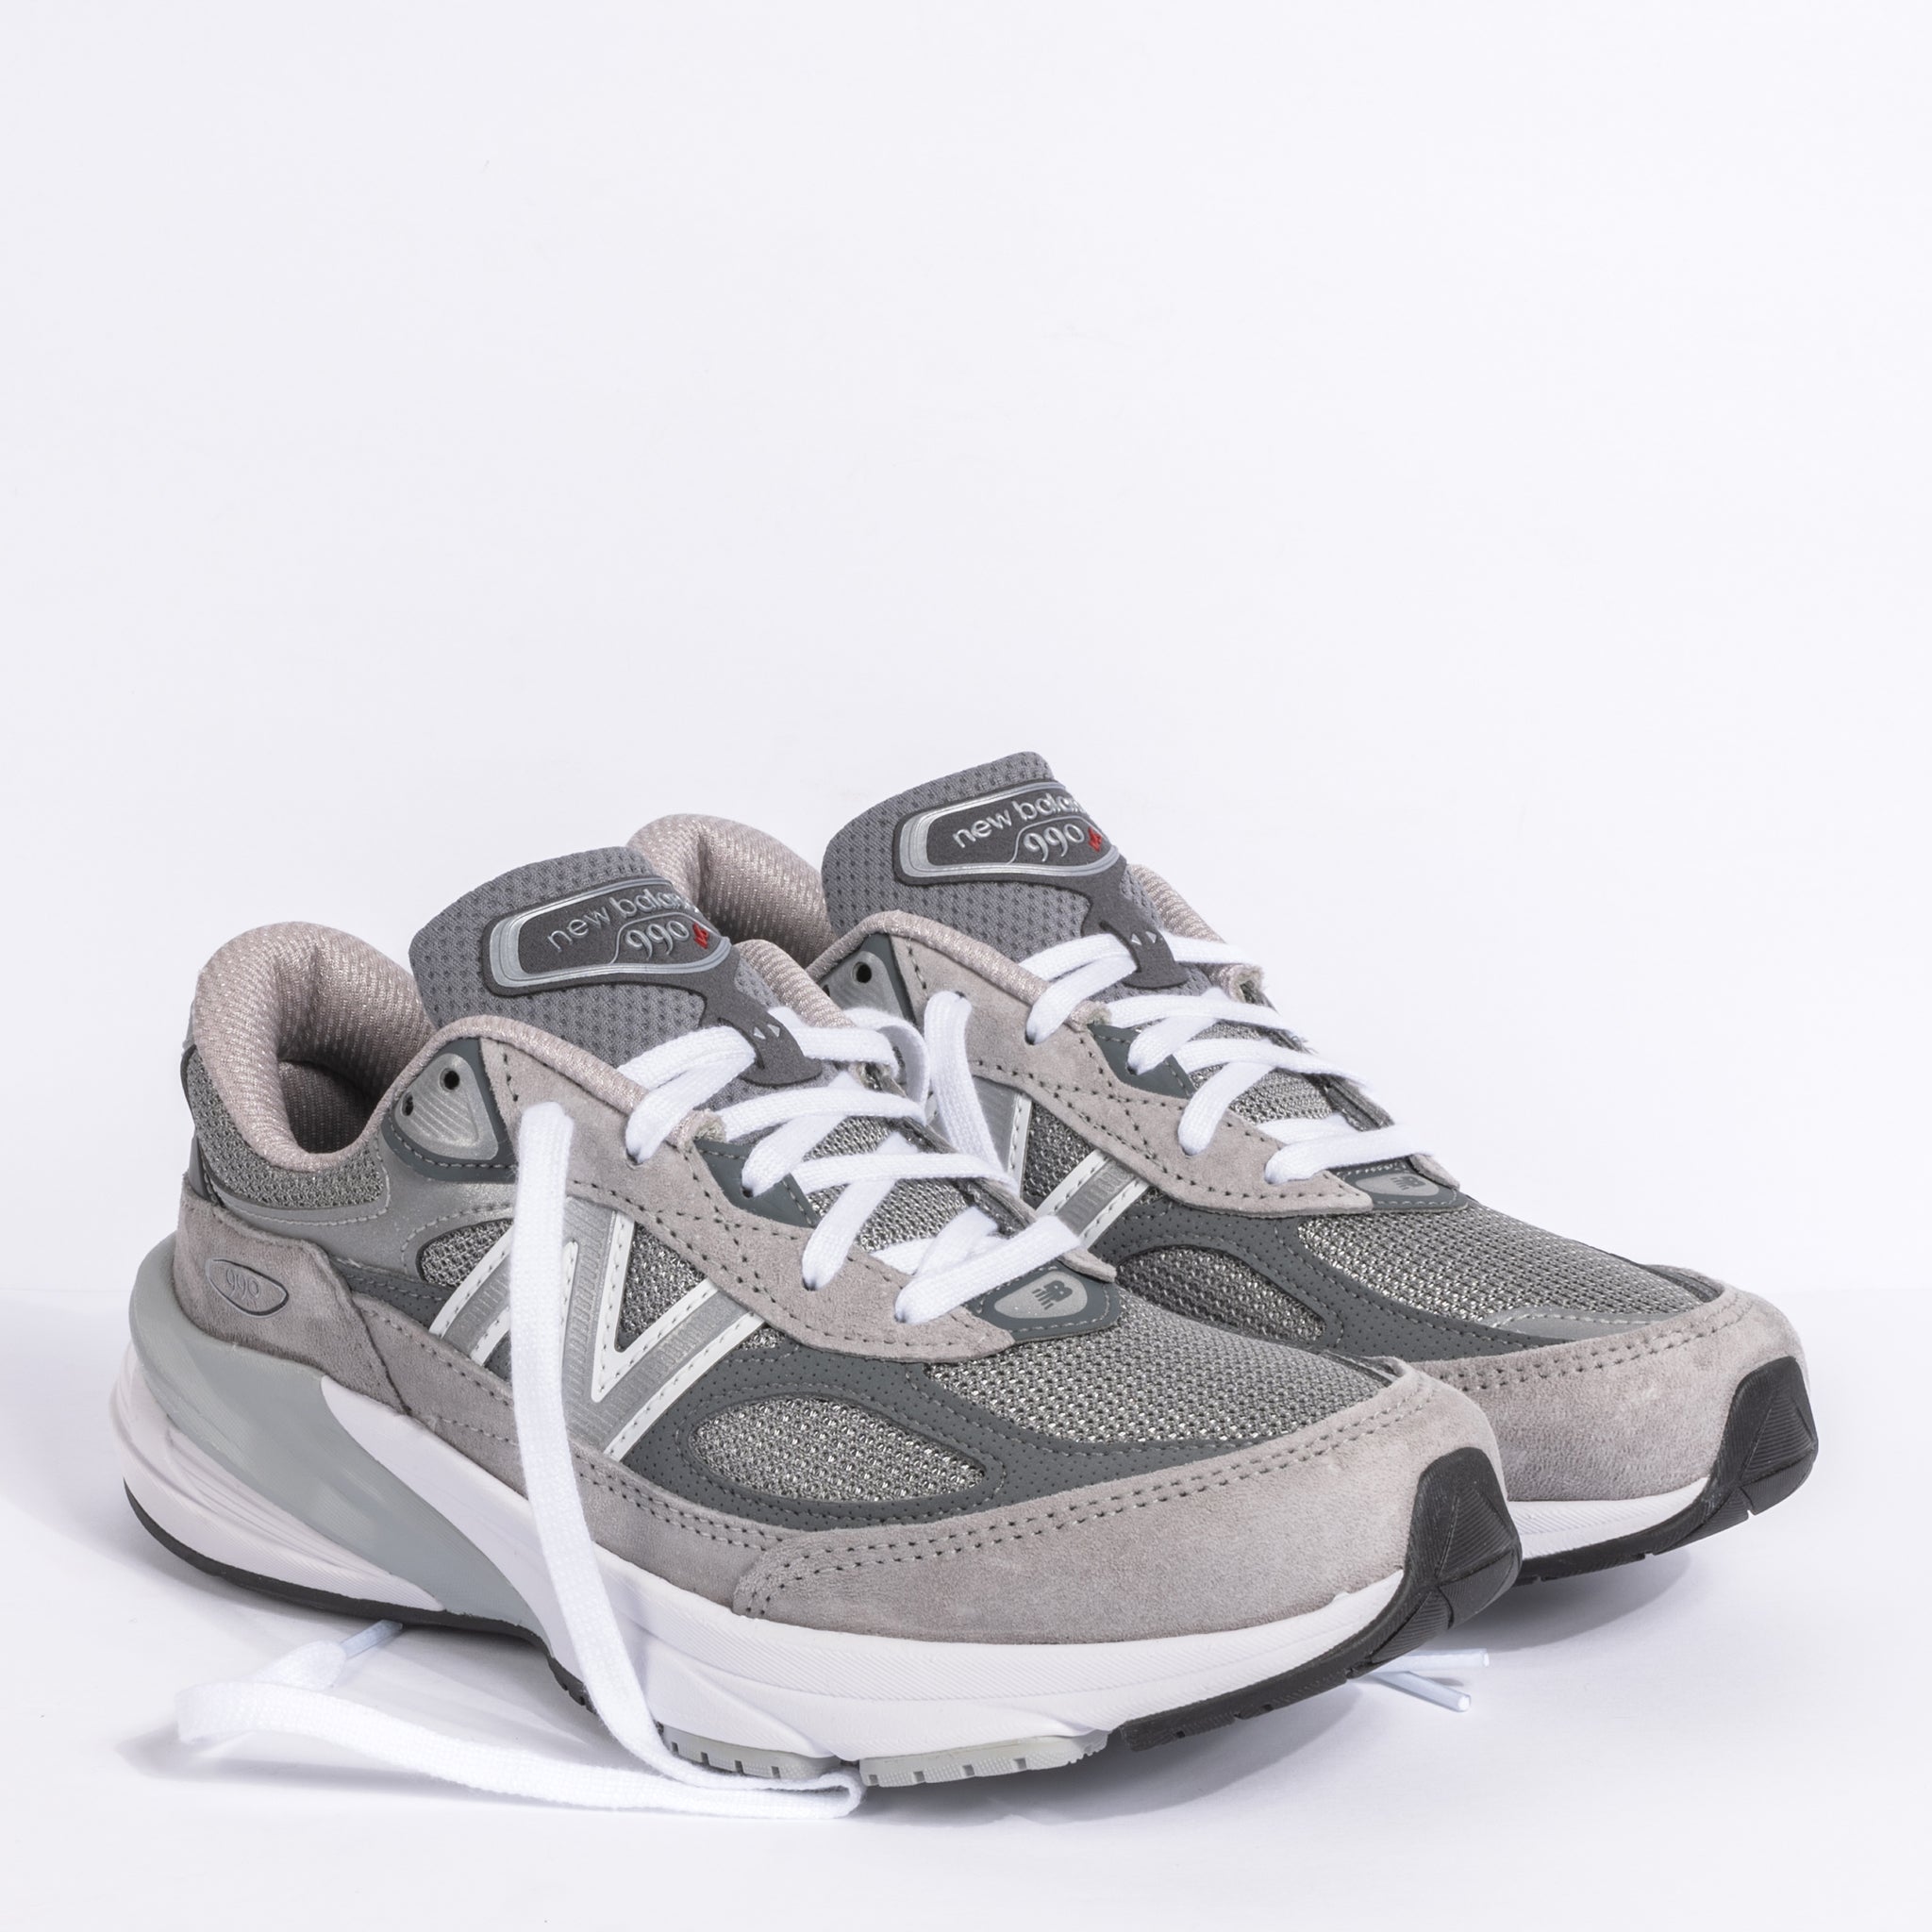 THE 990 V6 New Balance/Women's - GREY - SUEDE – Plaza Shoe Store